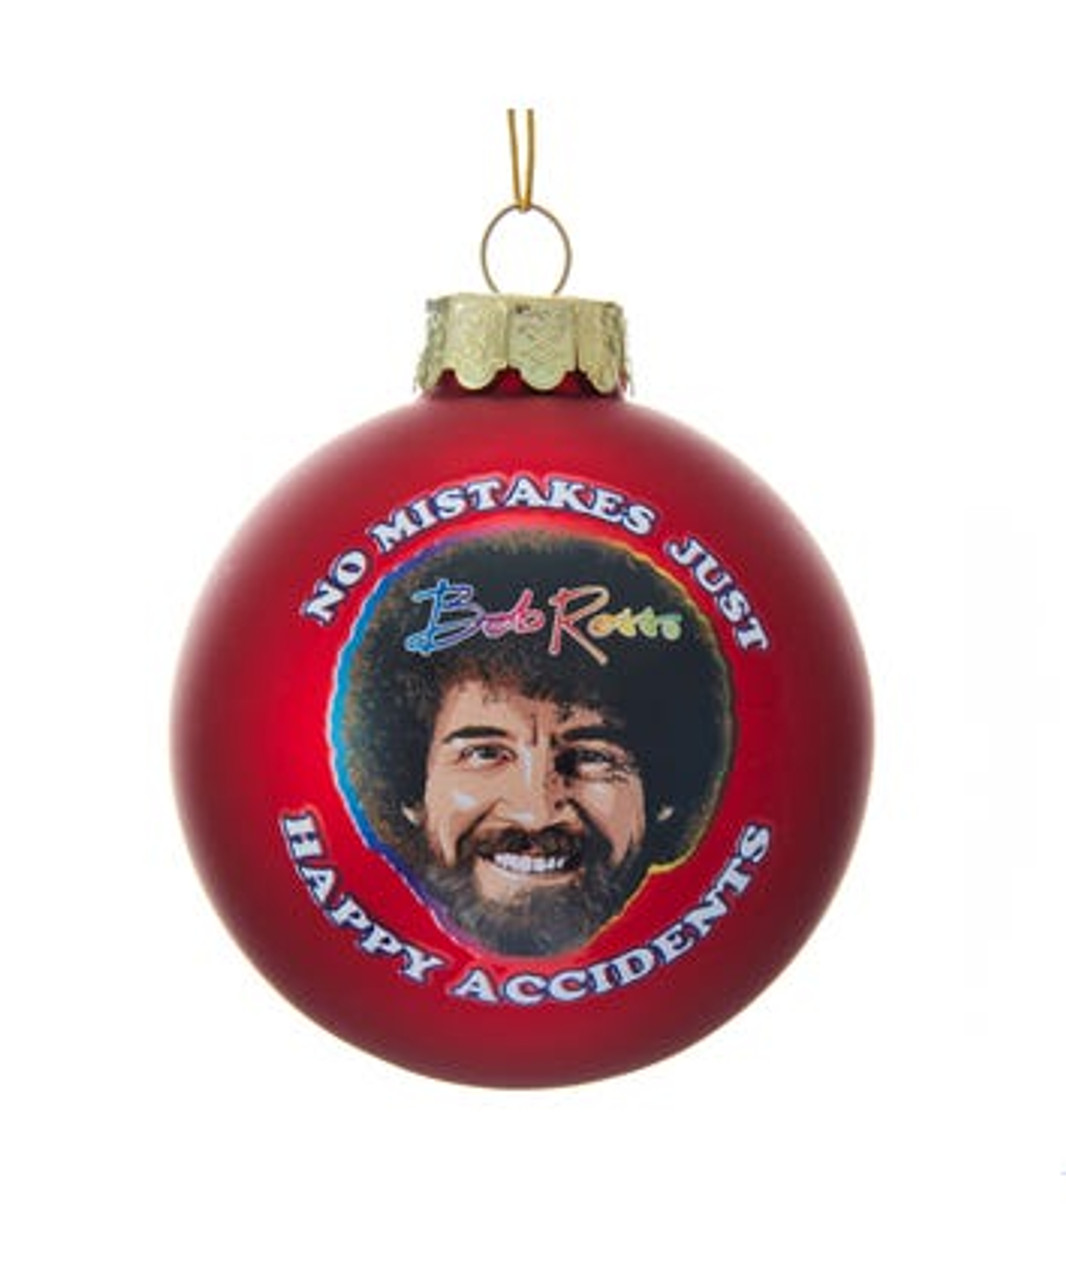 Bob Ross Happy Accidents Ball Ornament Red